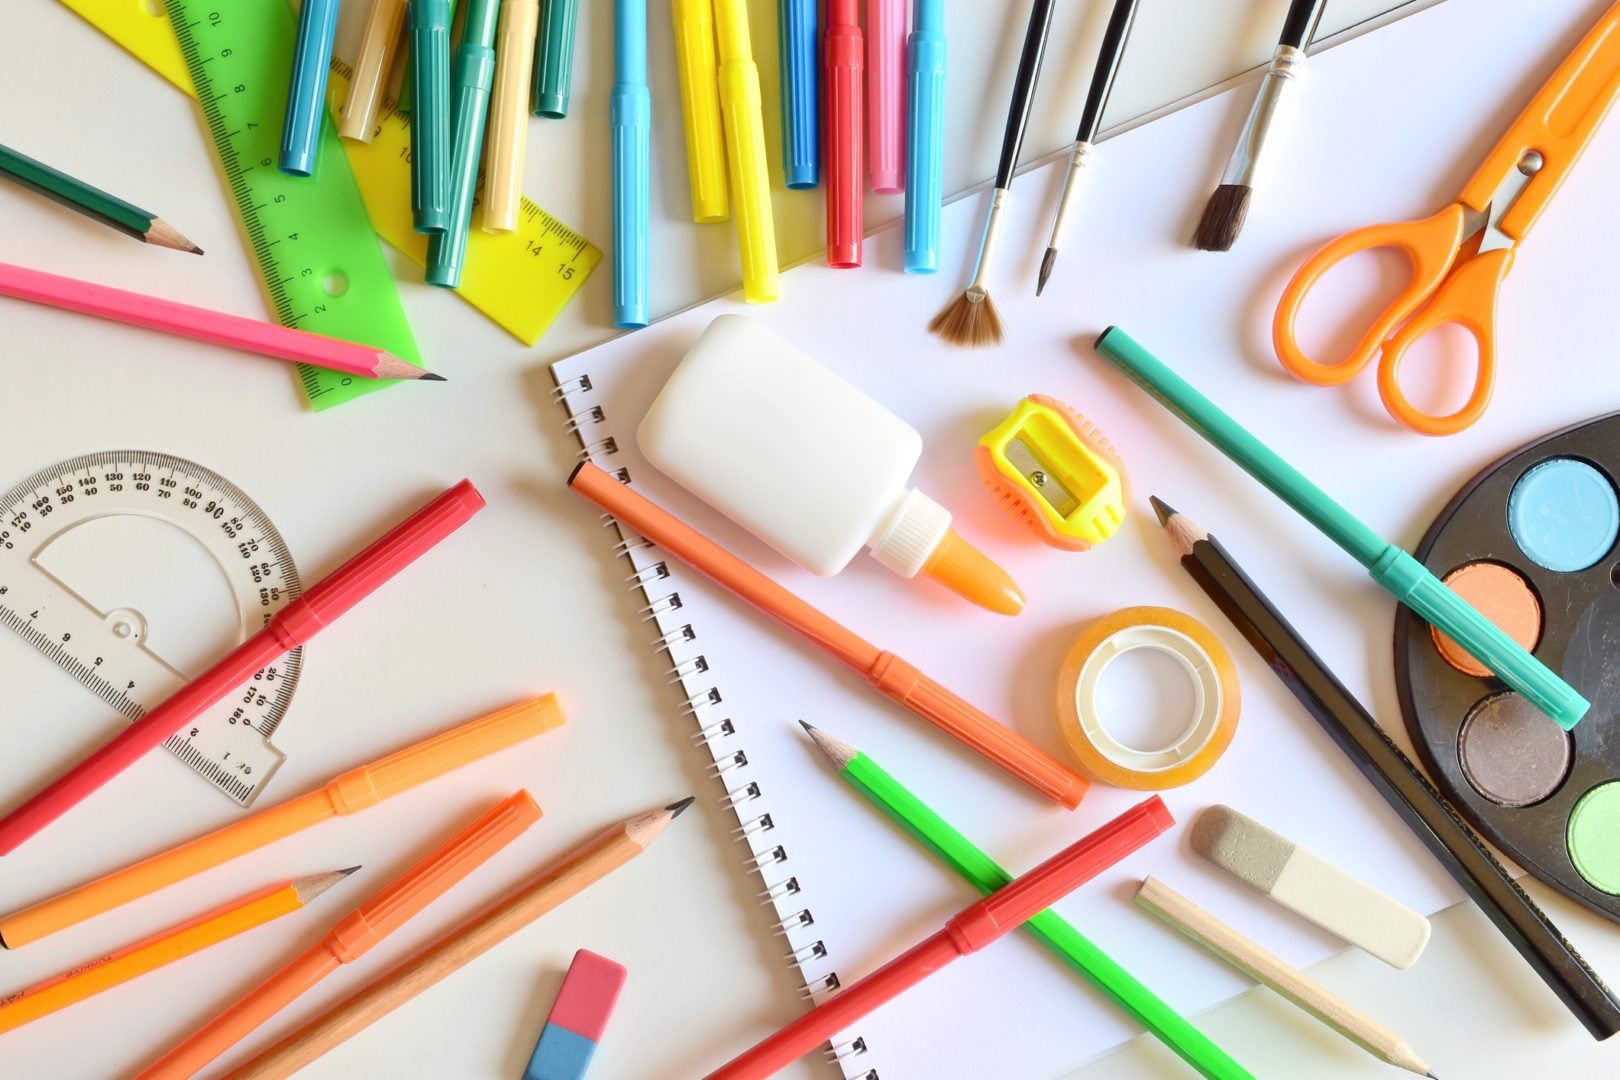 How to find free school supplies Free school supplies near you